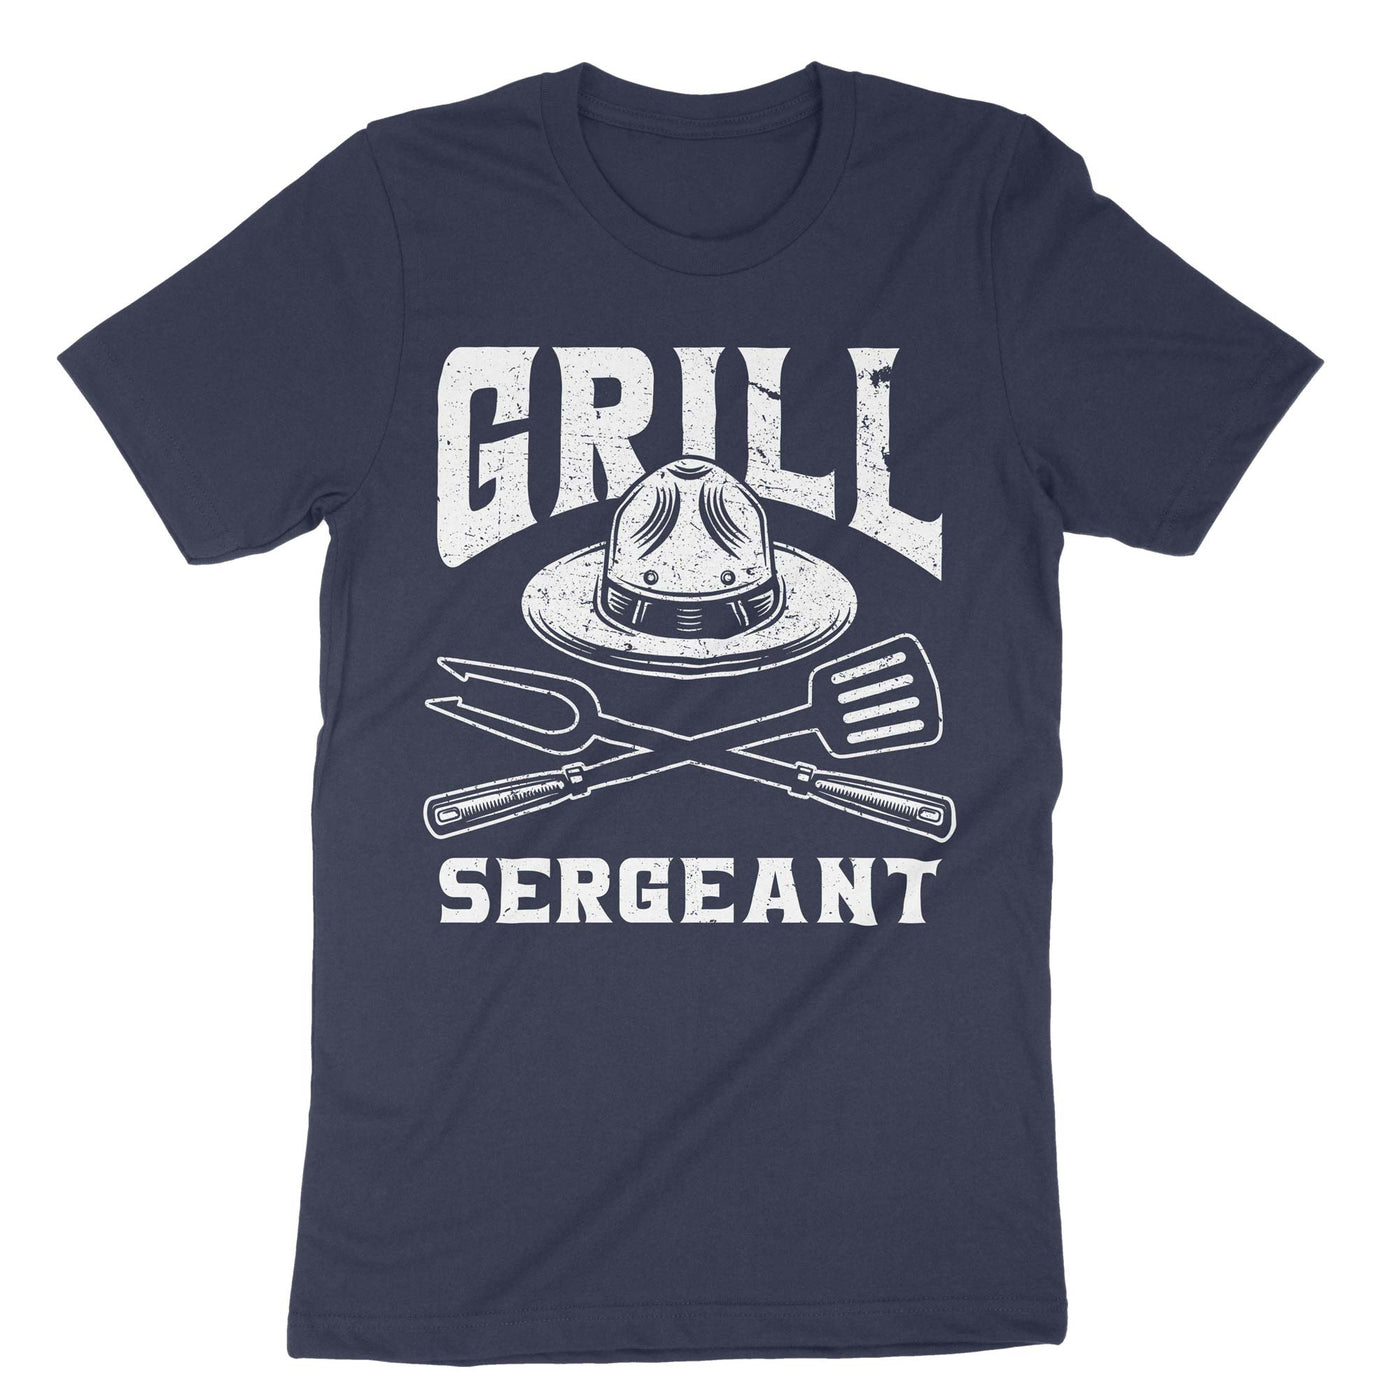 Navy Grill Sergeant T-Shirt#color_navy